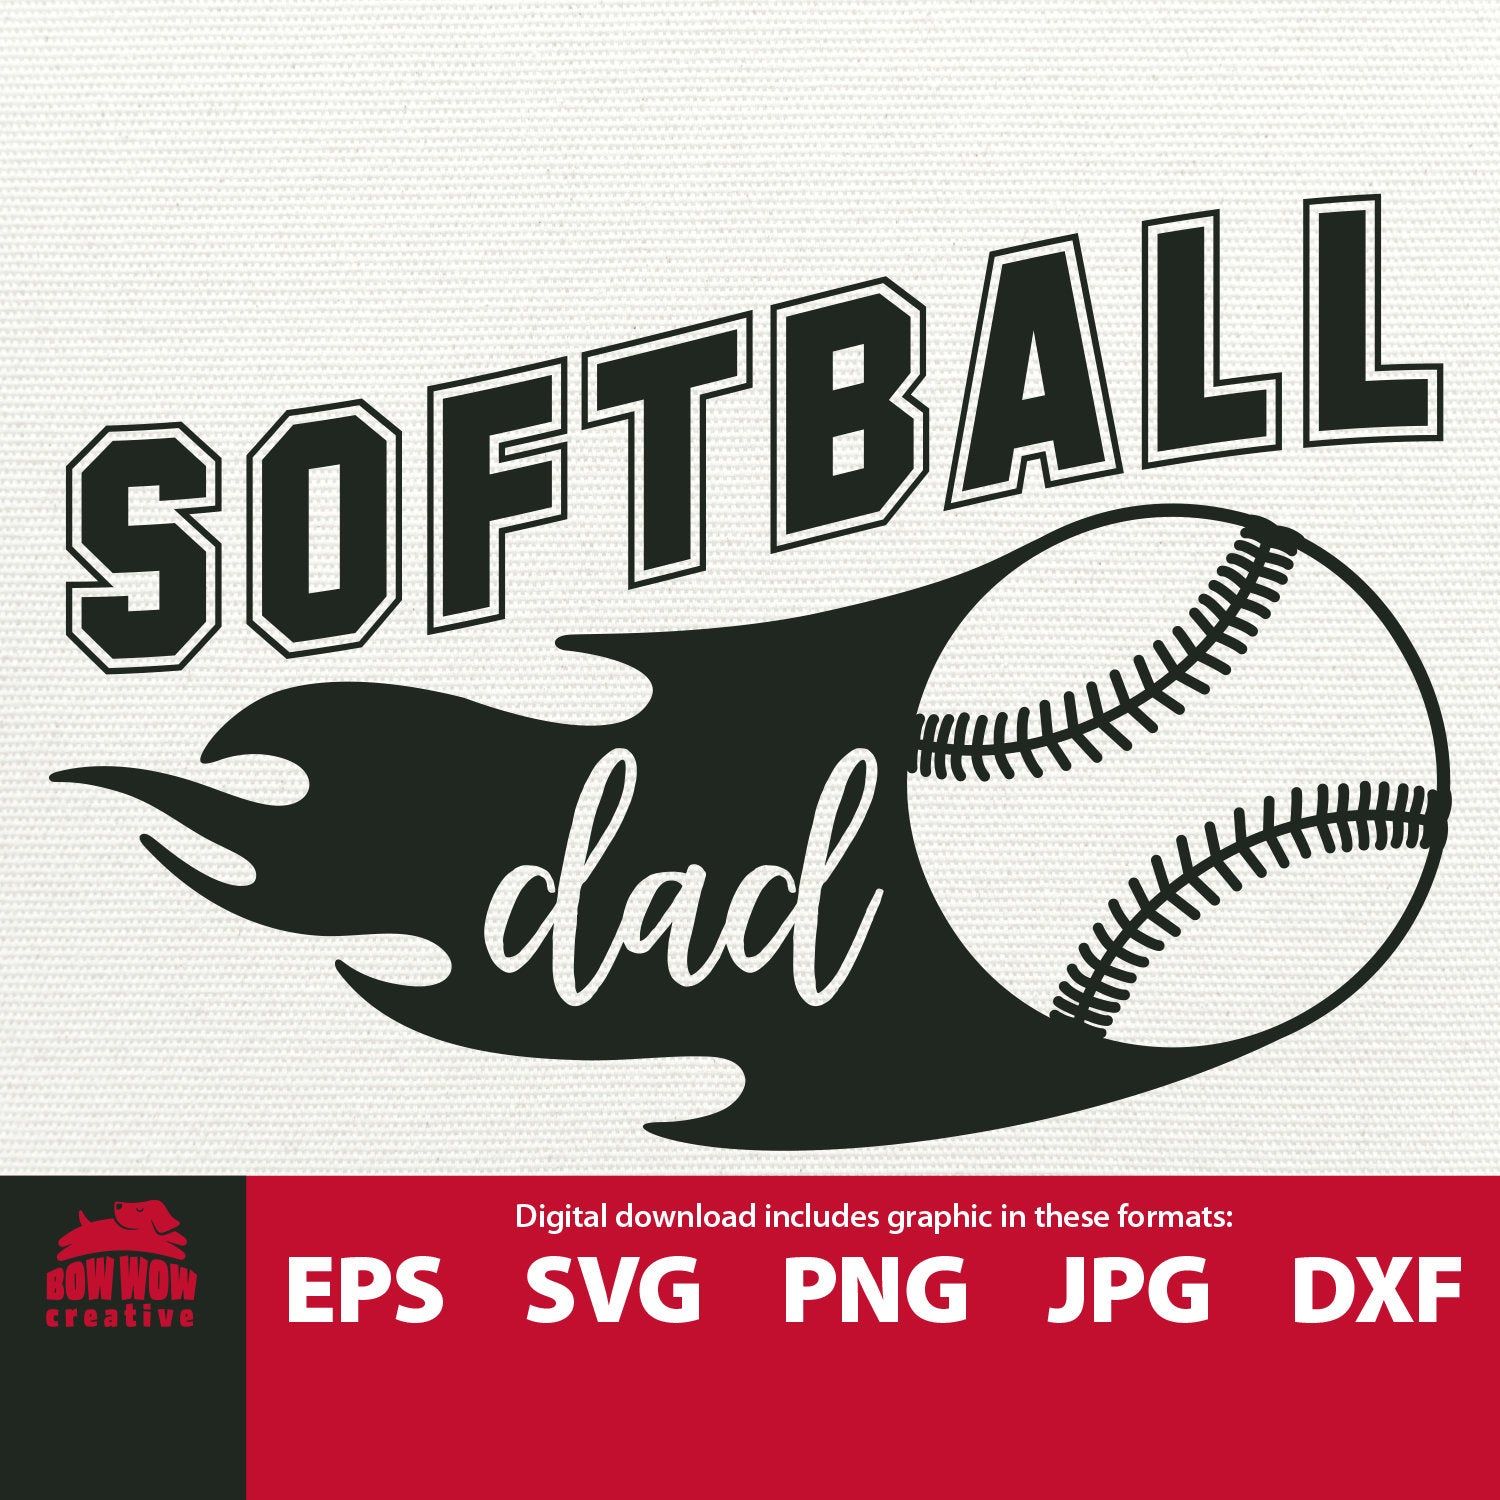 Download Softball clipart dad, Softball dad Transparent FREE for ...